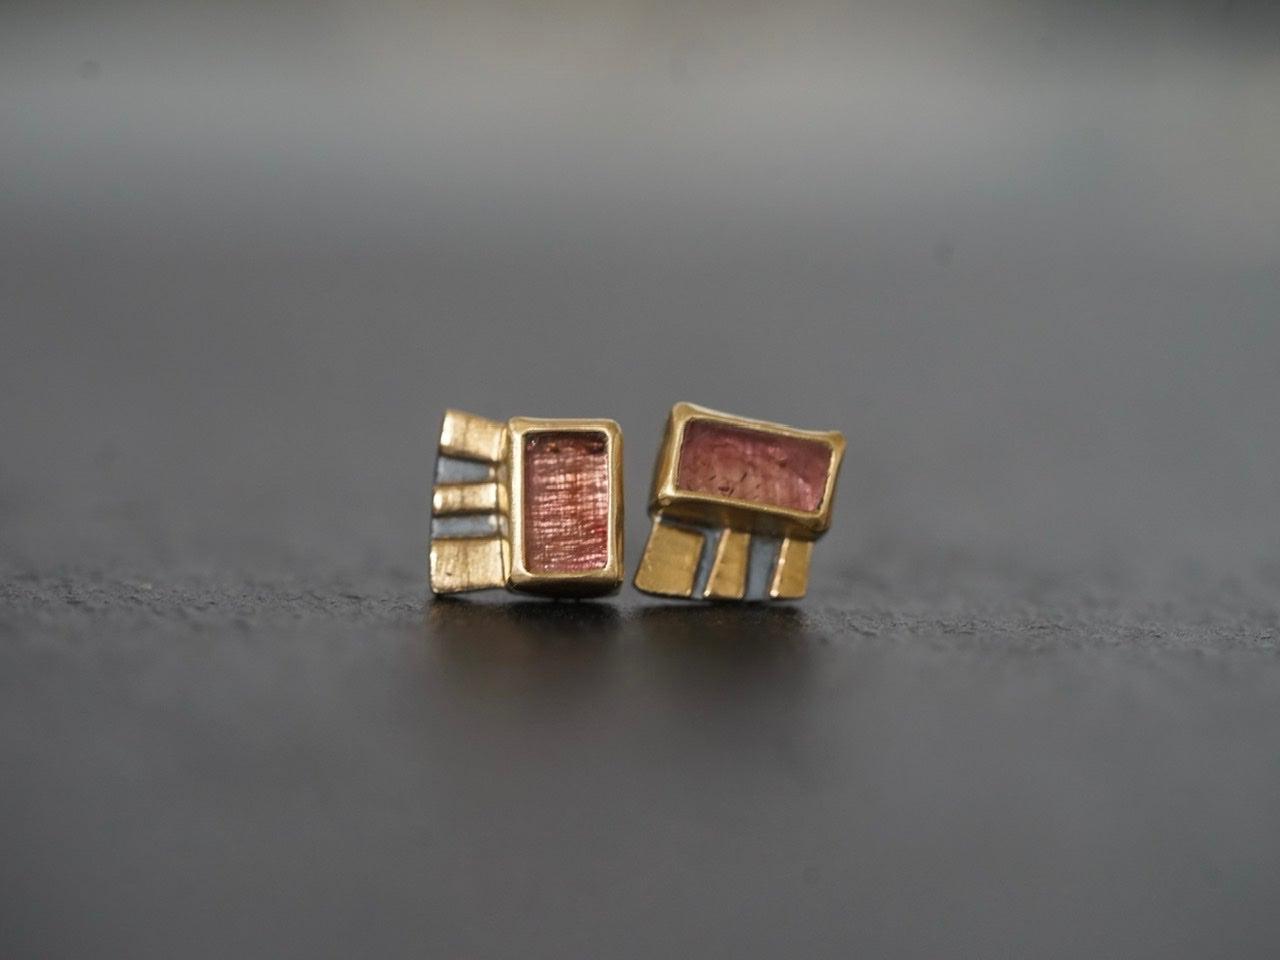 Rose tourmaline and 22k gold post earrings